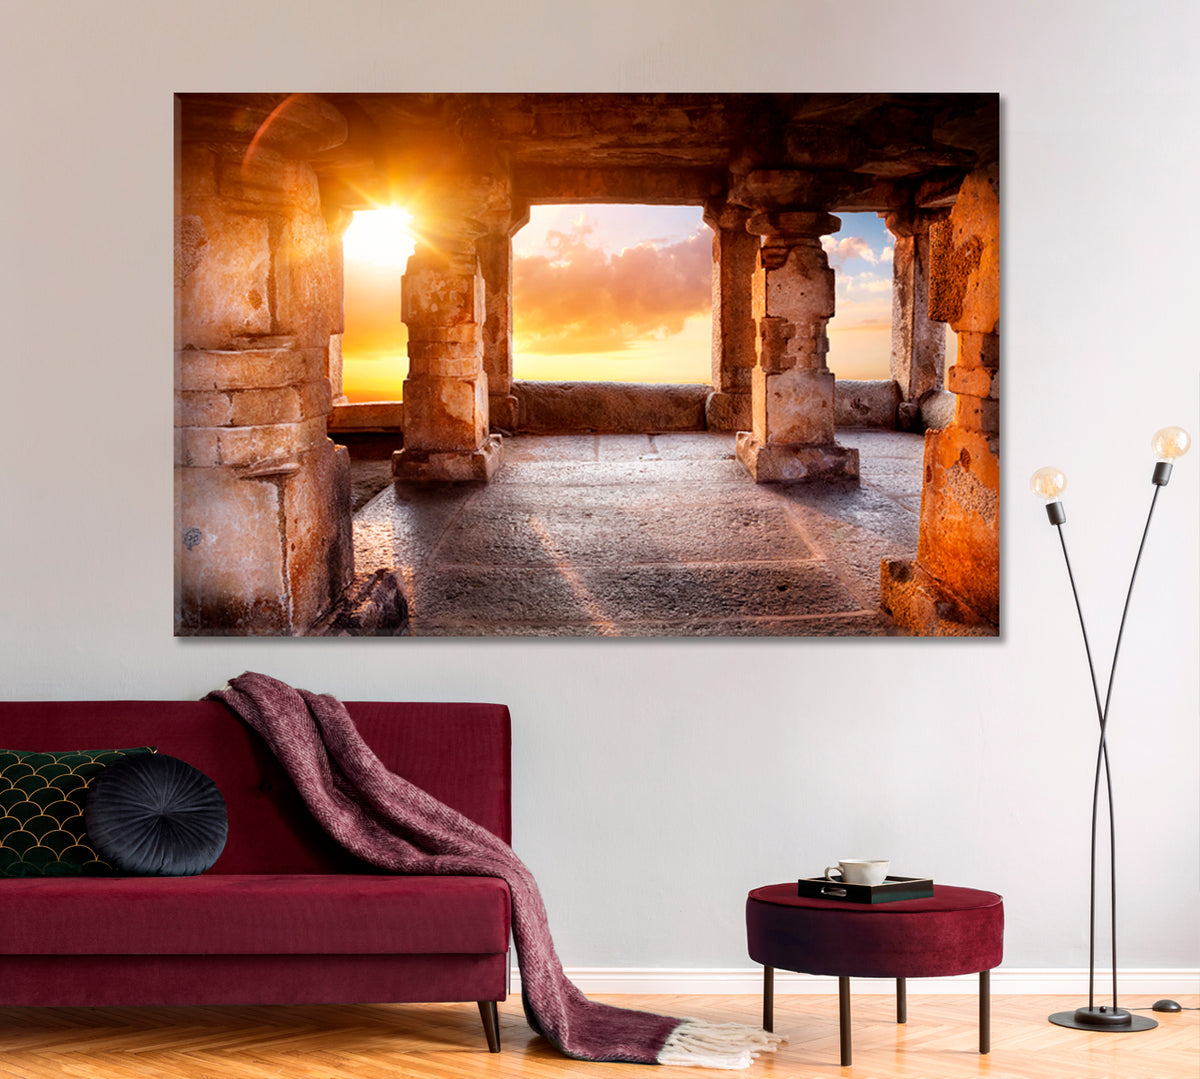 Ancient Temple with Columns Wall Art Canvas Print Photo Art Artesty 1 panel 24" x 16" 